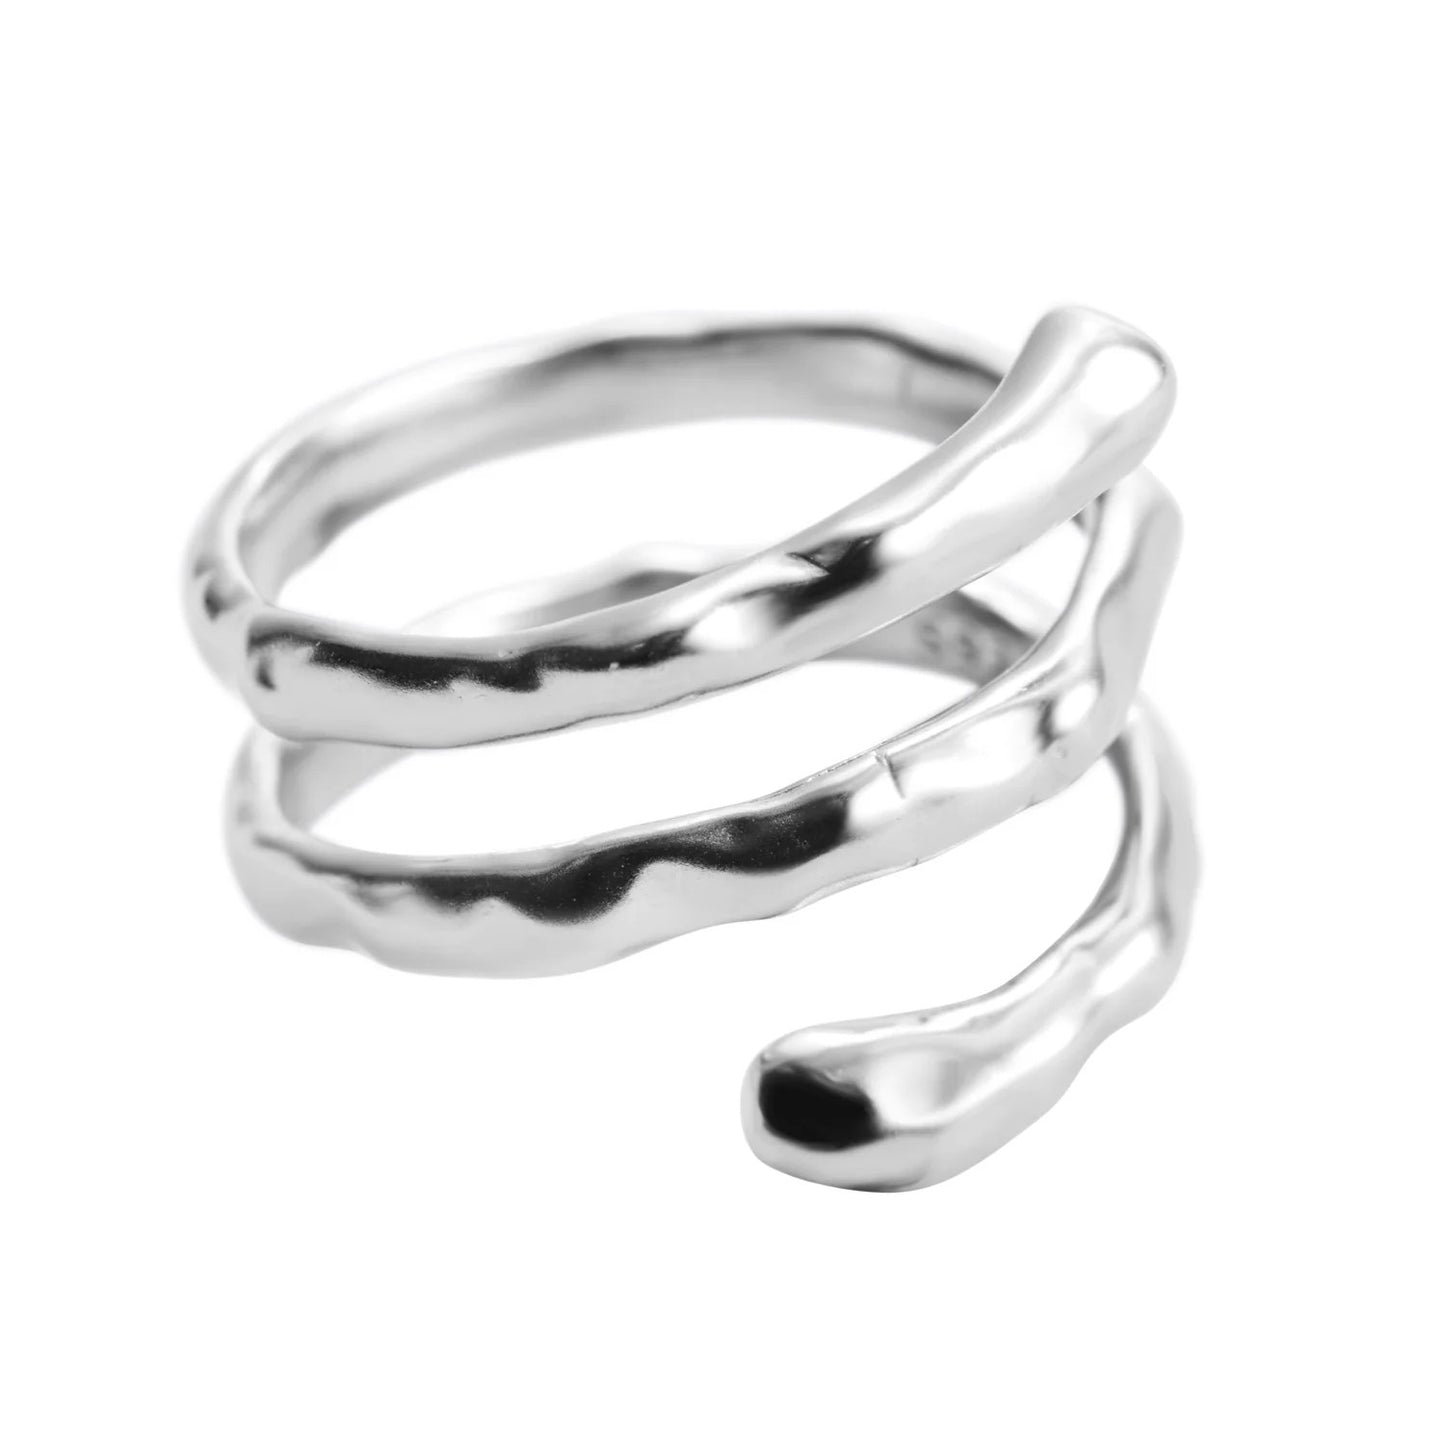 Sustainable resizable silver ring with spiral design. Made from 925 sterling silver, hypoallergenic, minimalist, and elegant. Perfect for all occasions.